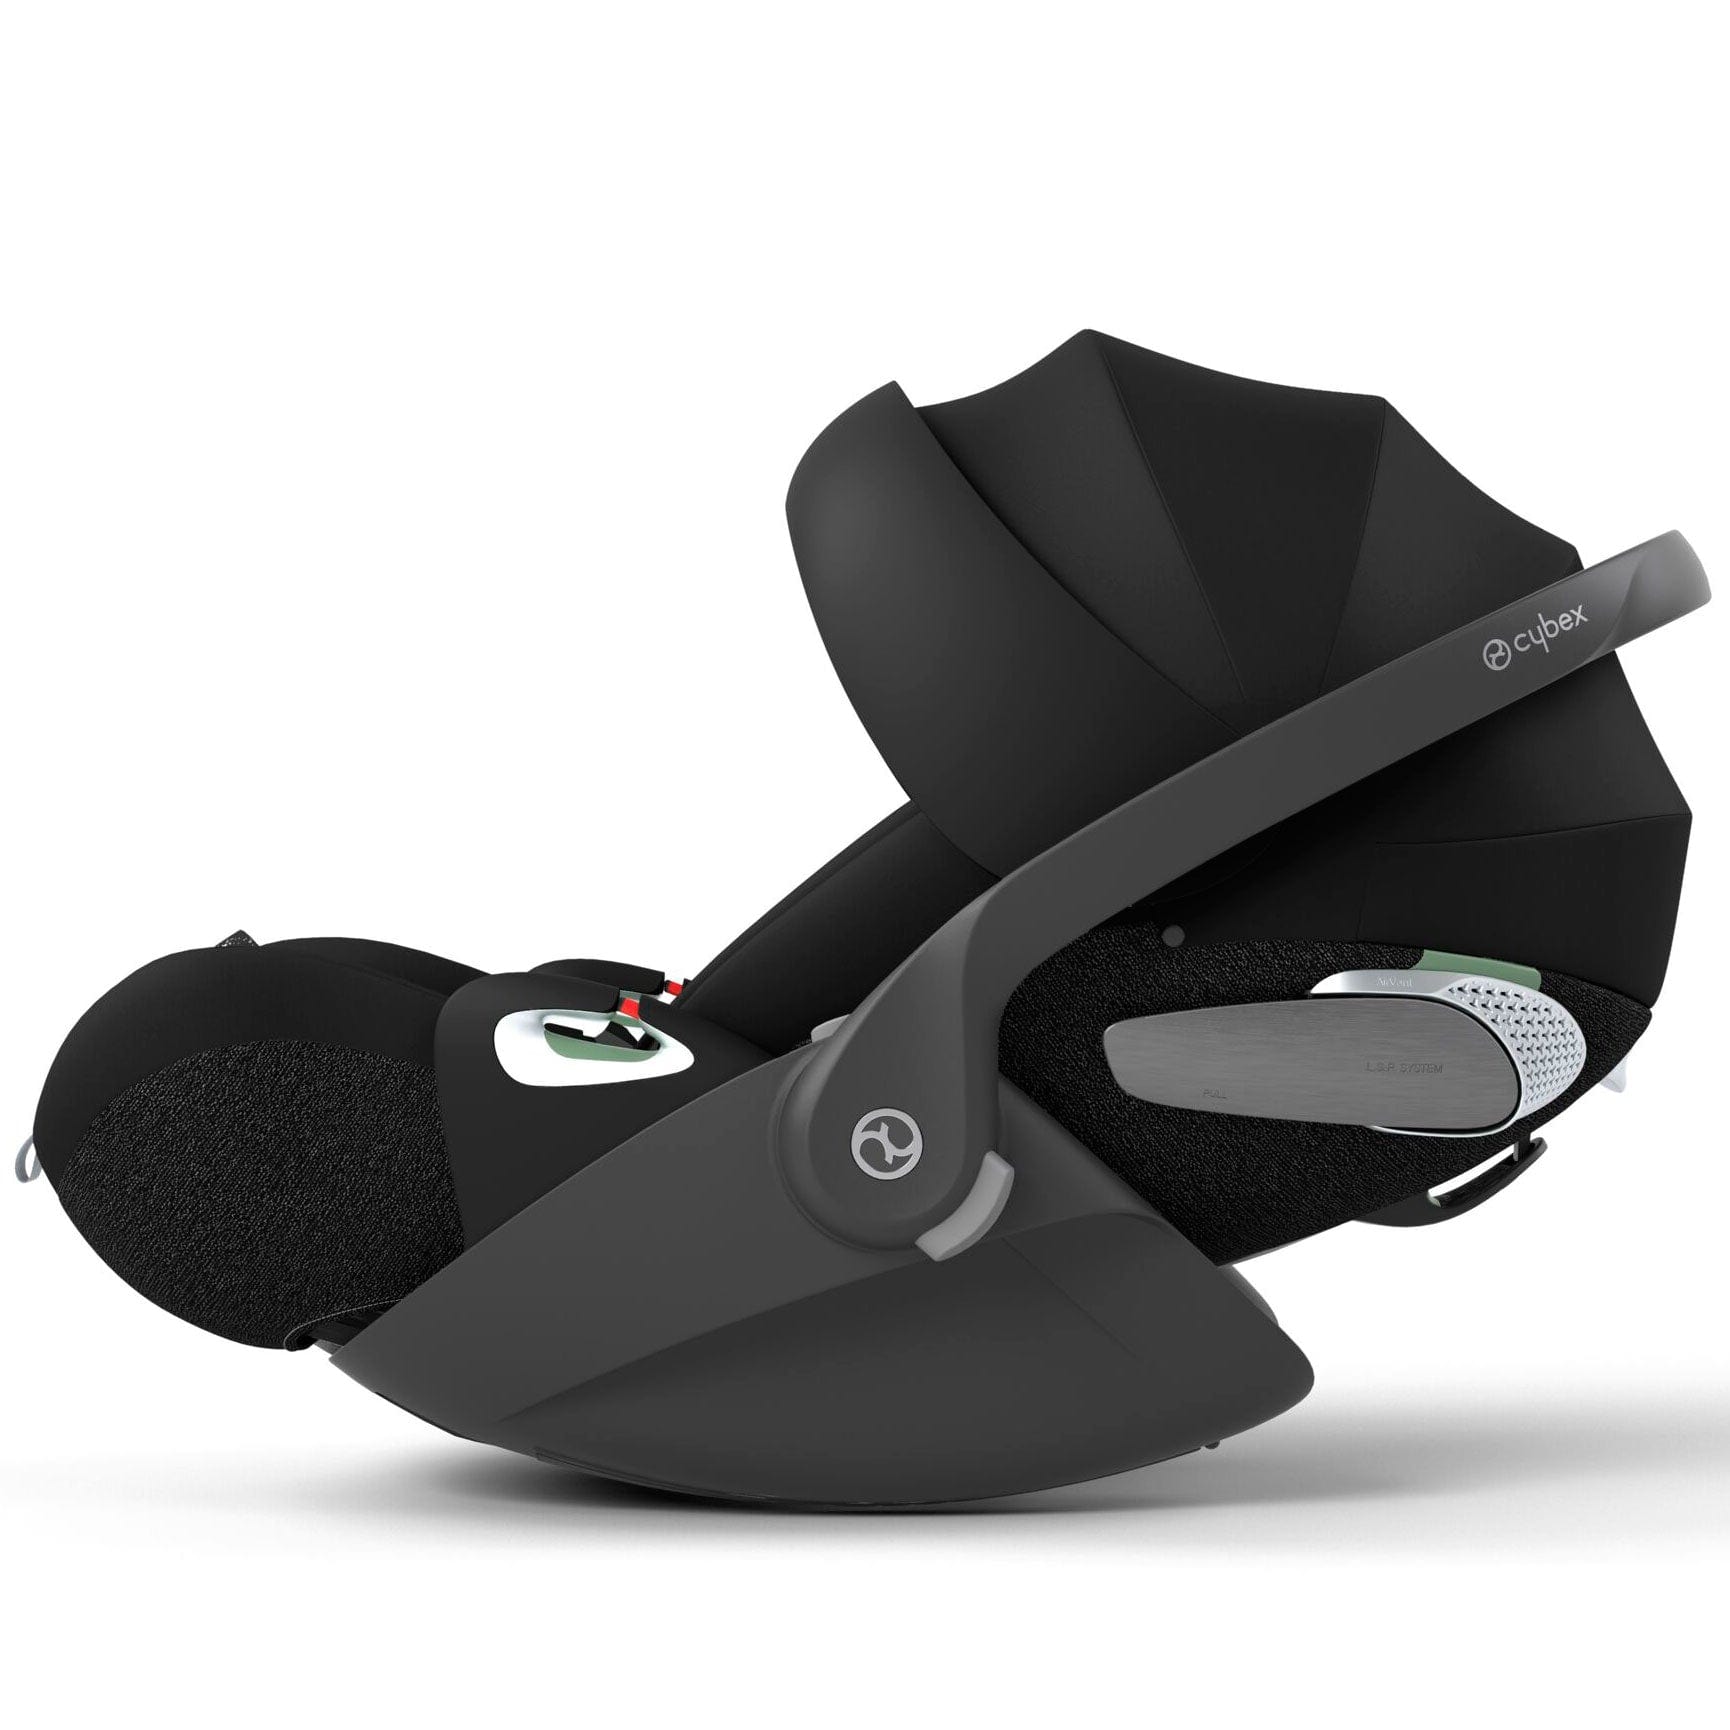 Uppababy travel systems Uppababy Vista V2 Cloud T & Base Travel System - Declan 8312-DEC